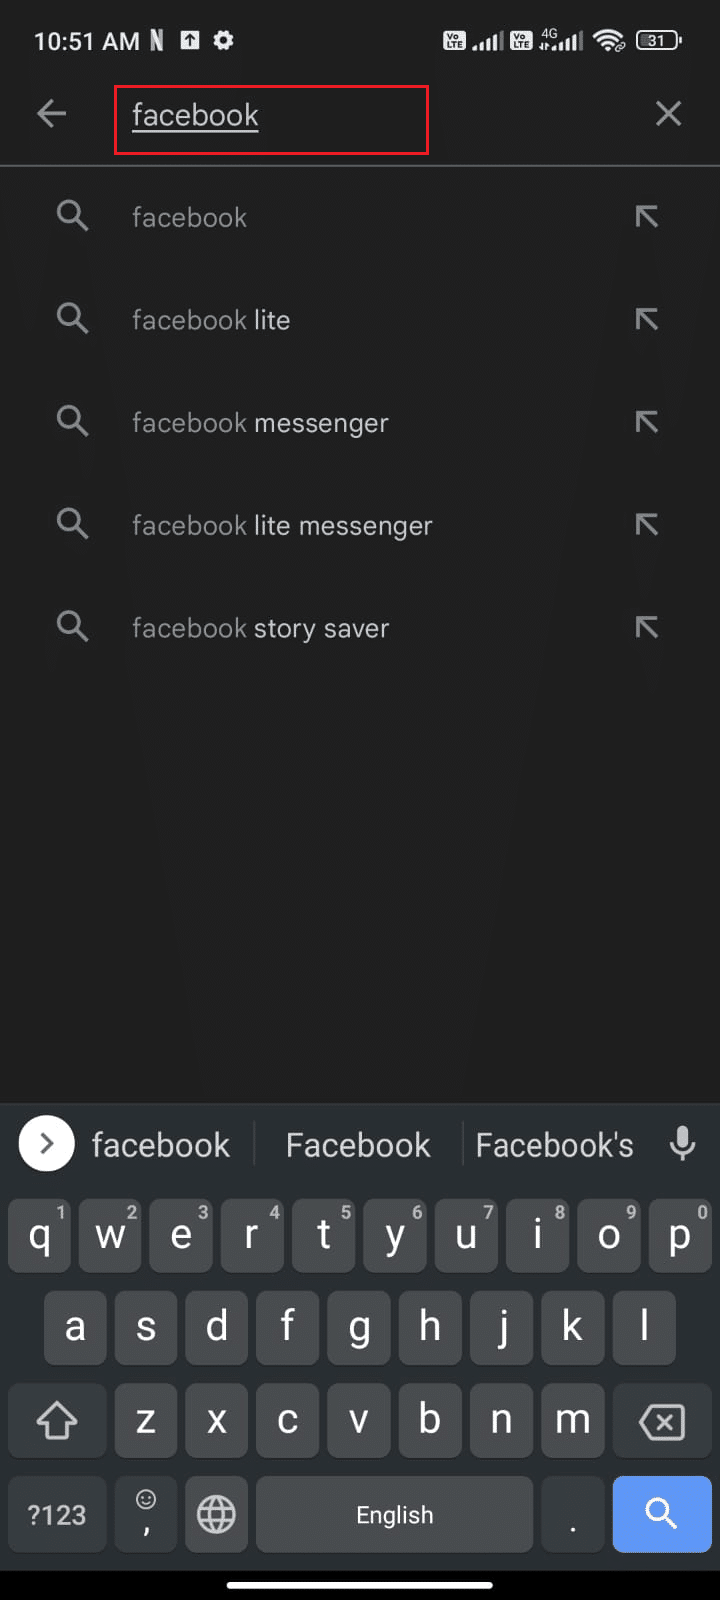 Go to Play Store and search Facebook | Facebook notifications not working